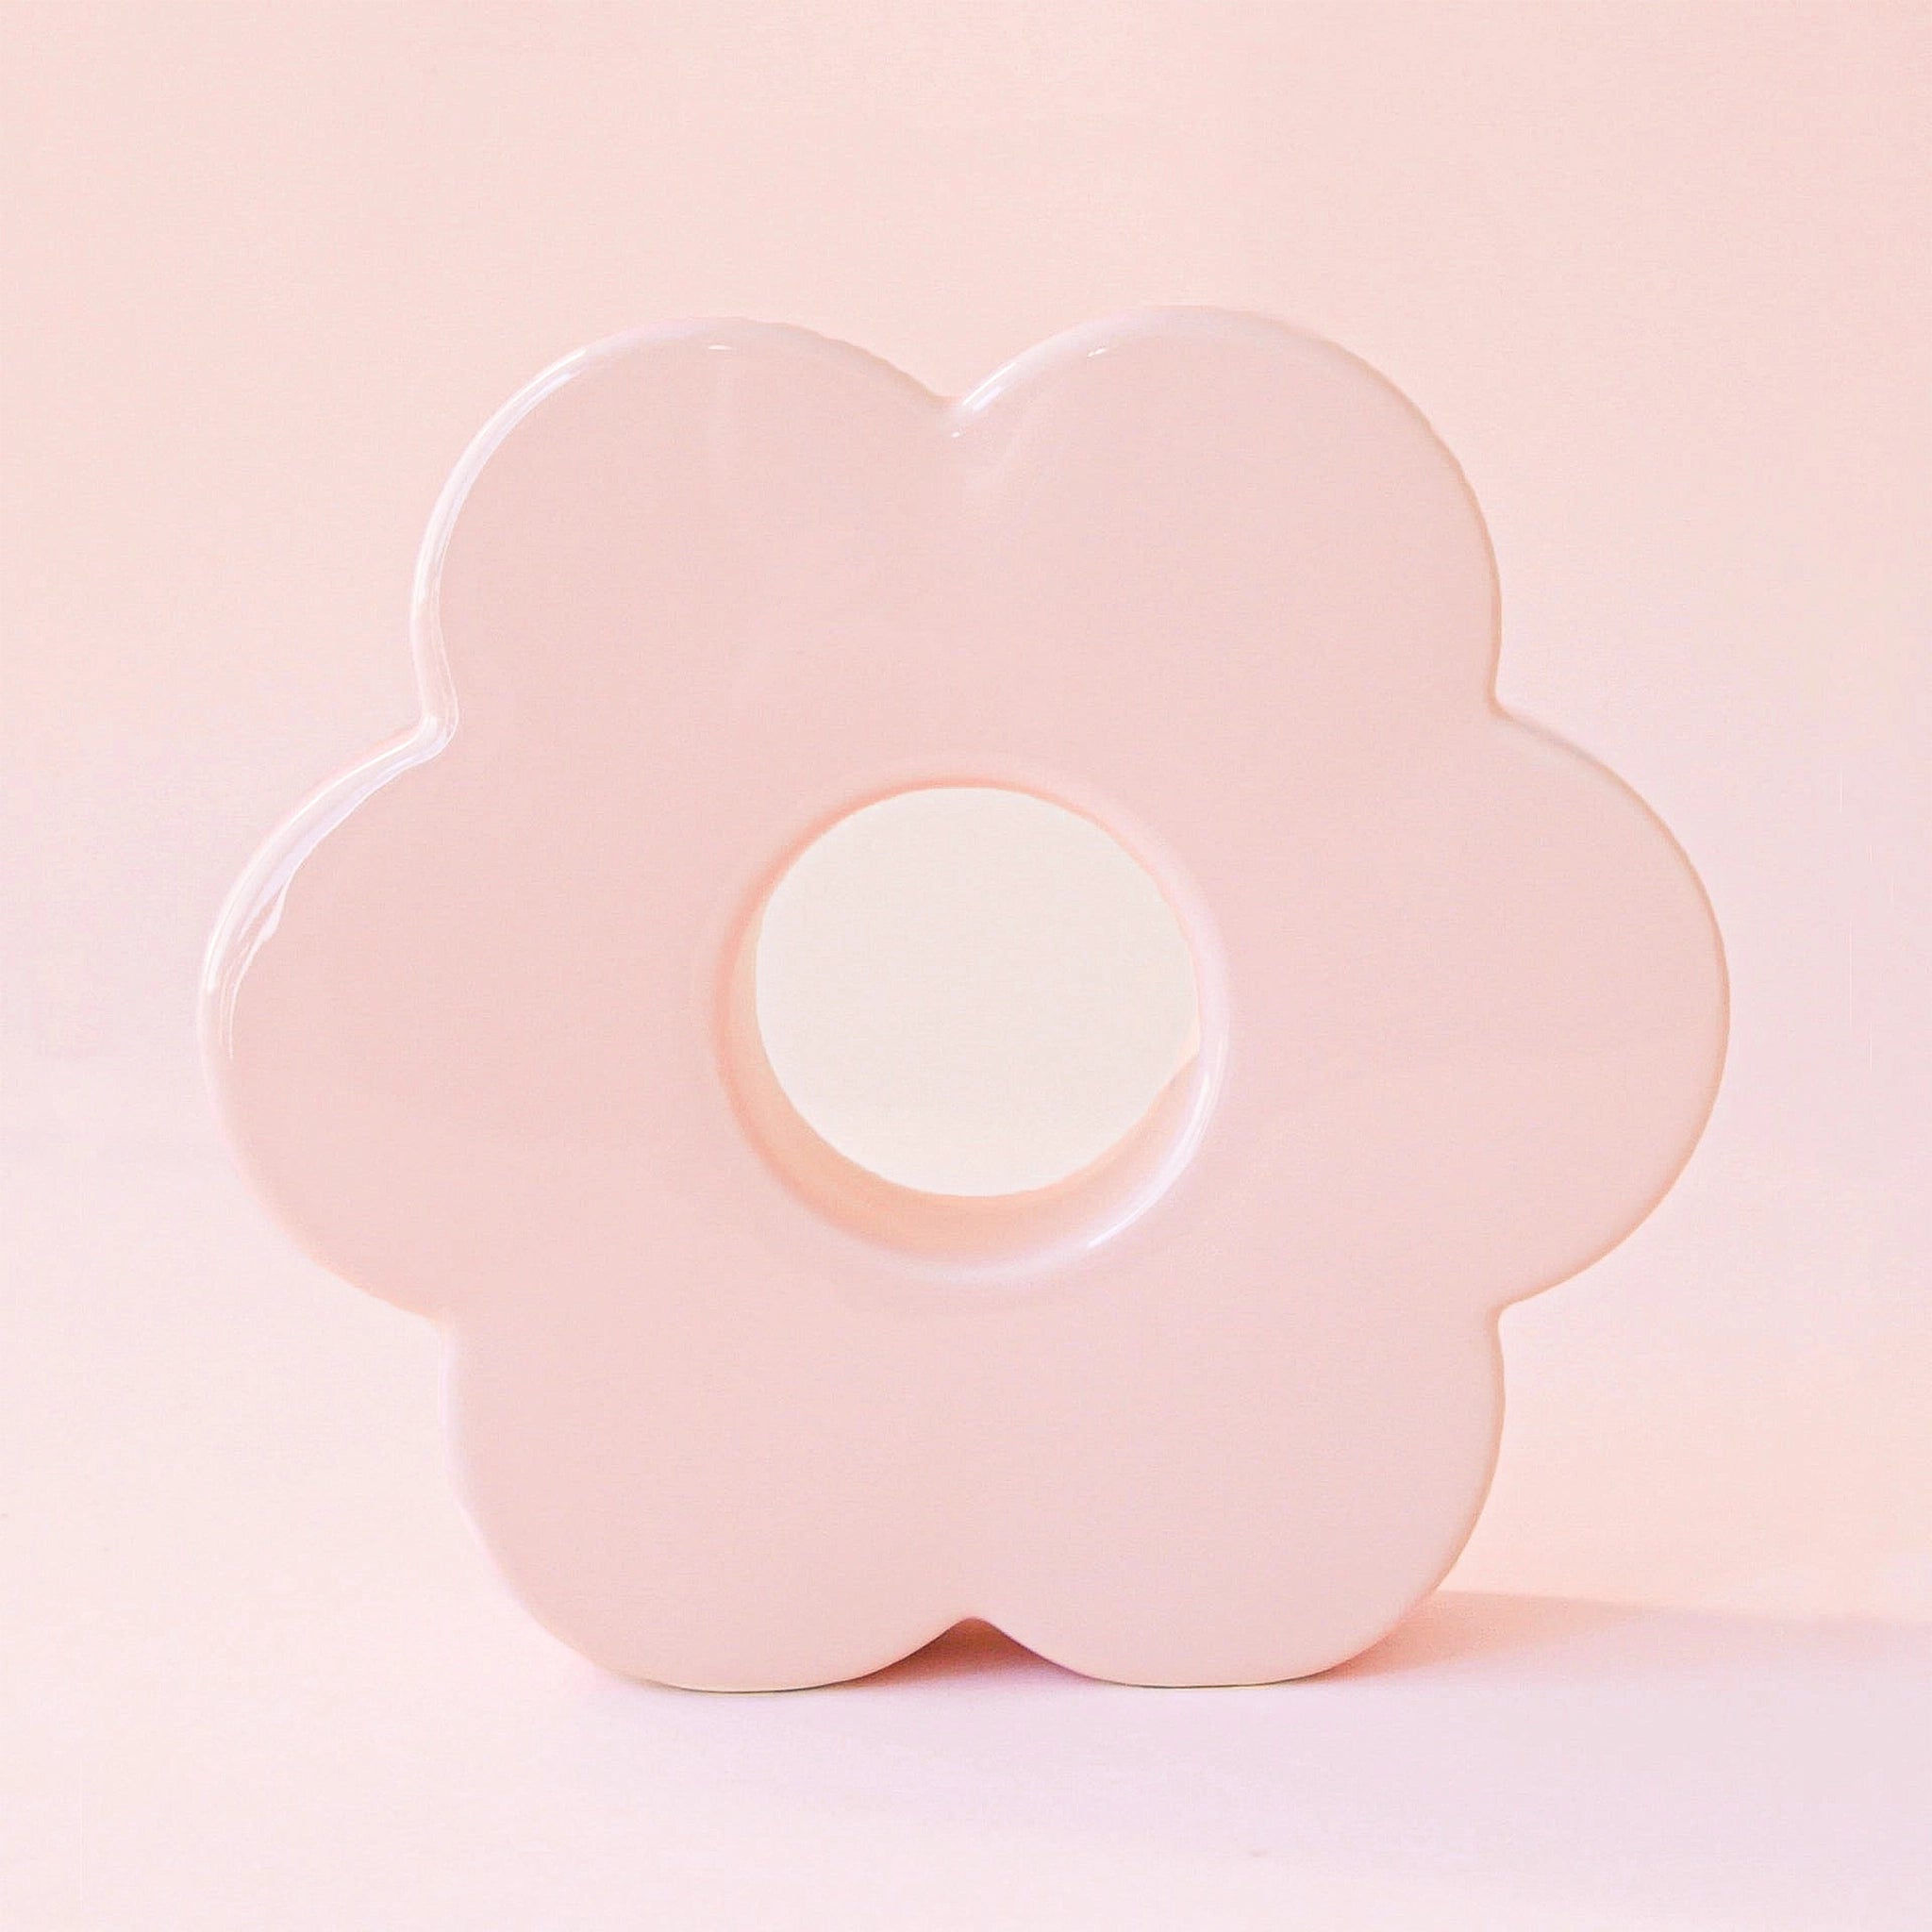 A light pink ceramic vase in the shape of a daisy with an opening in the center and an opening at the top to insert plants and floral stems.